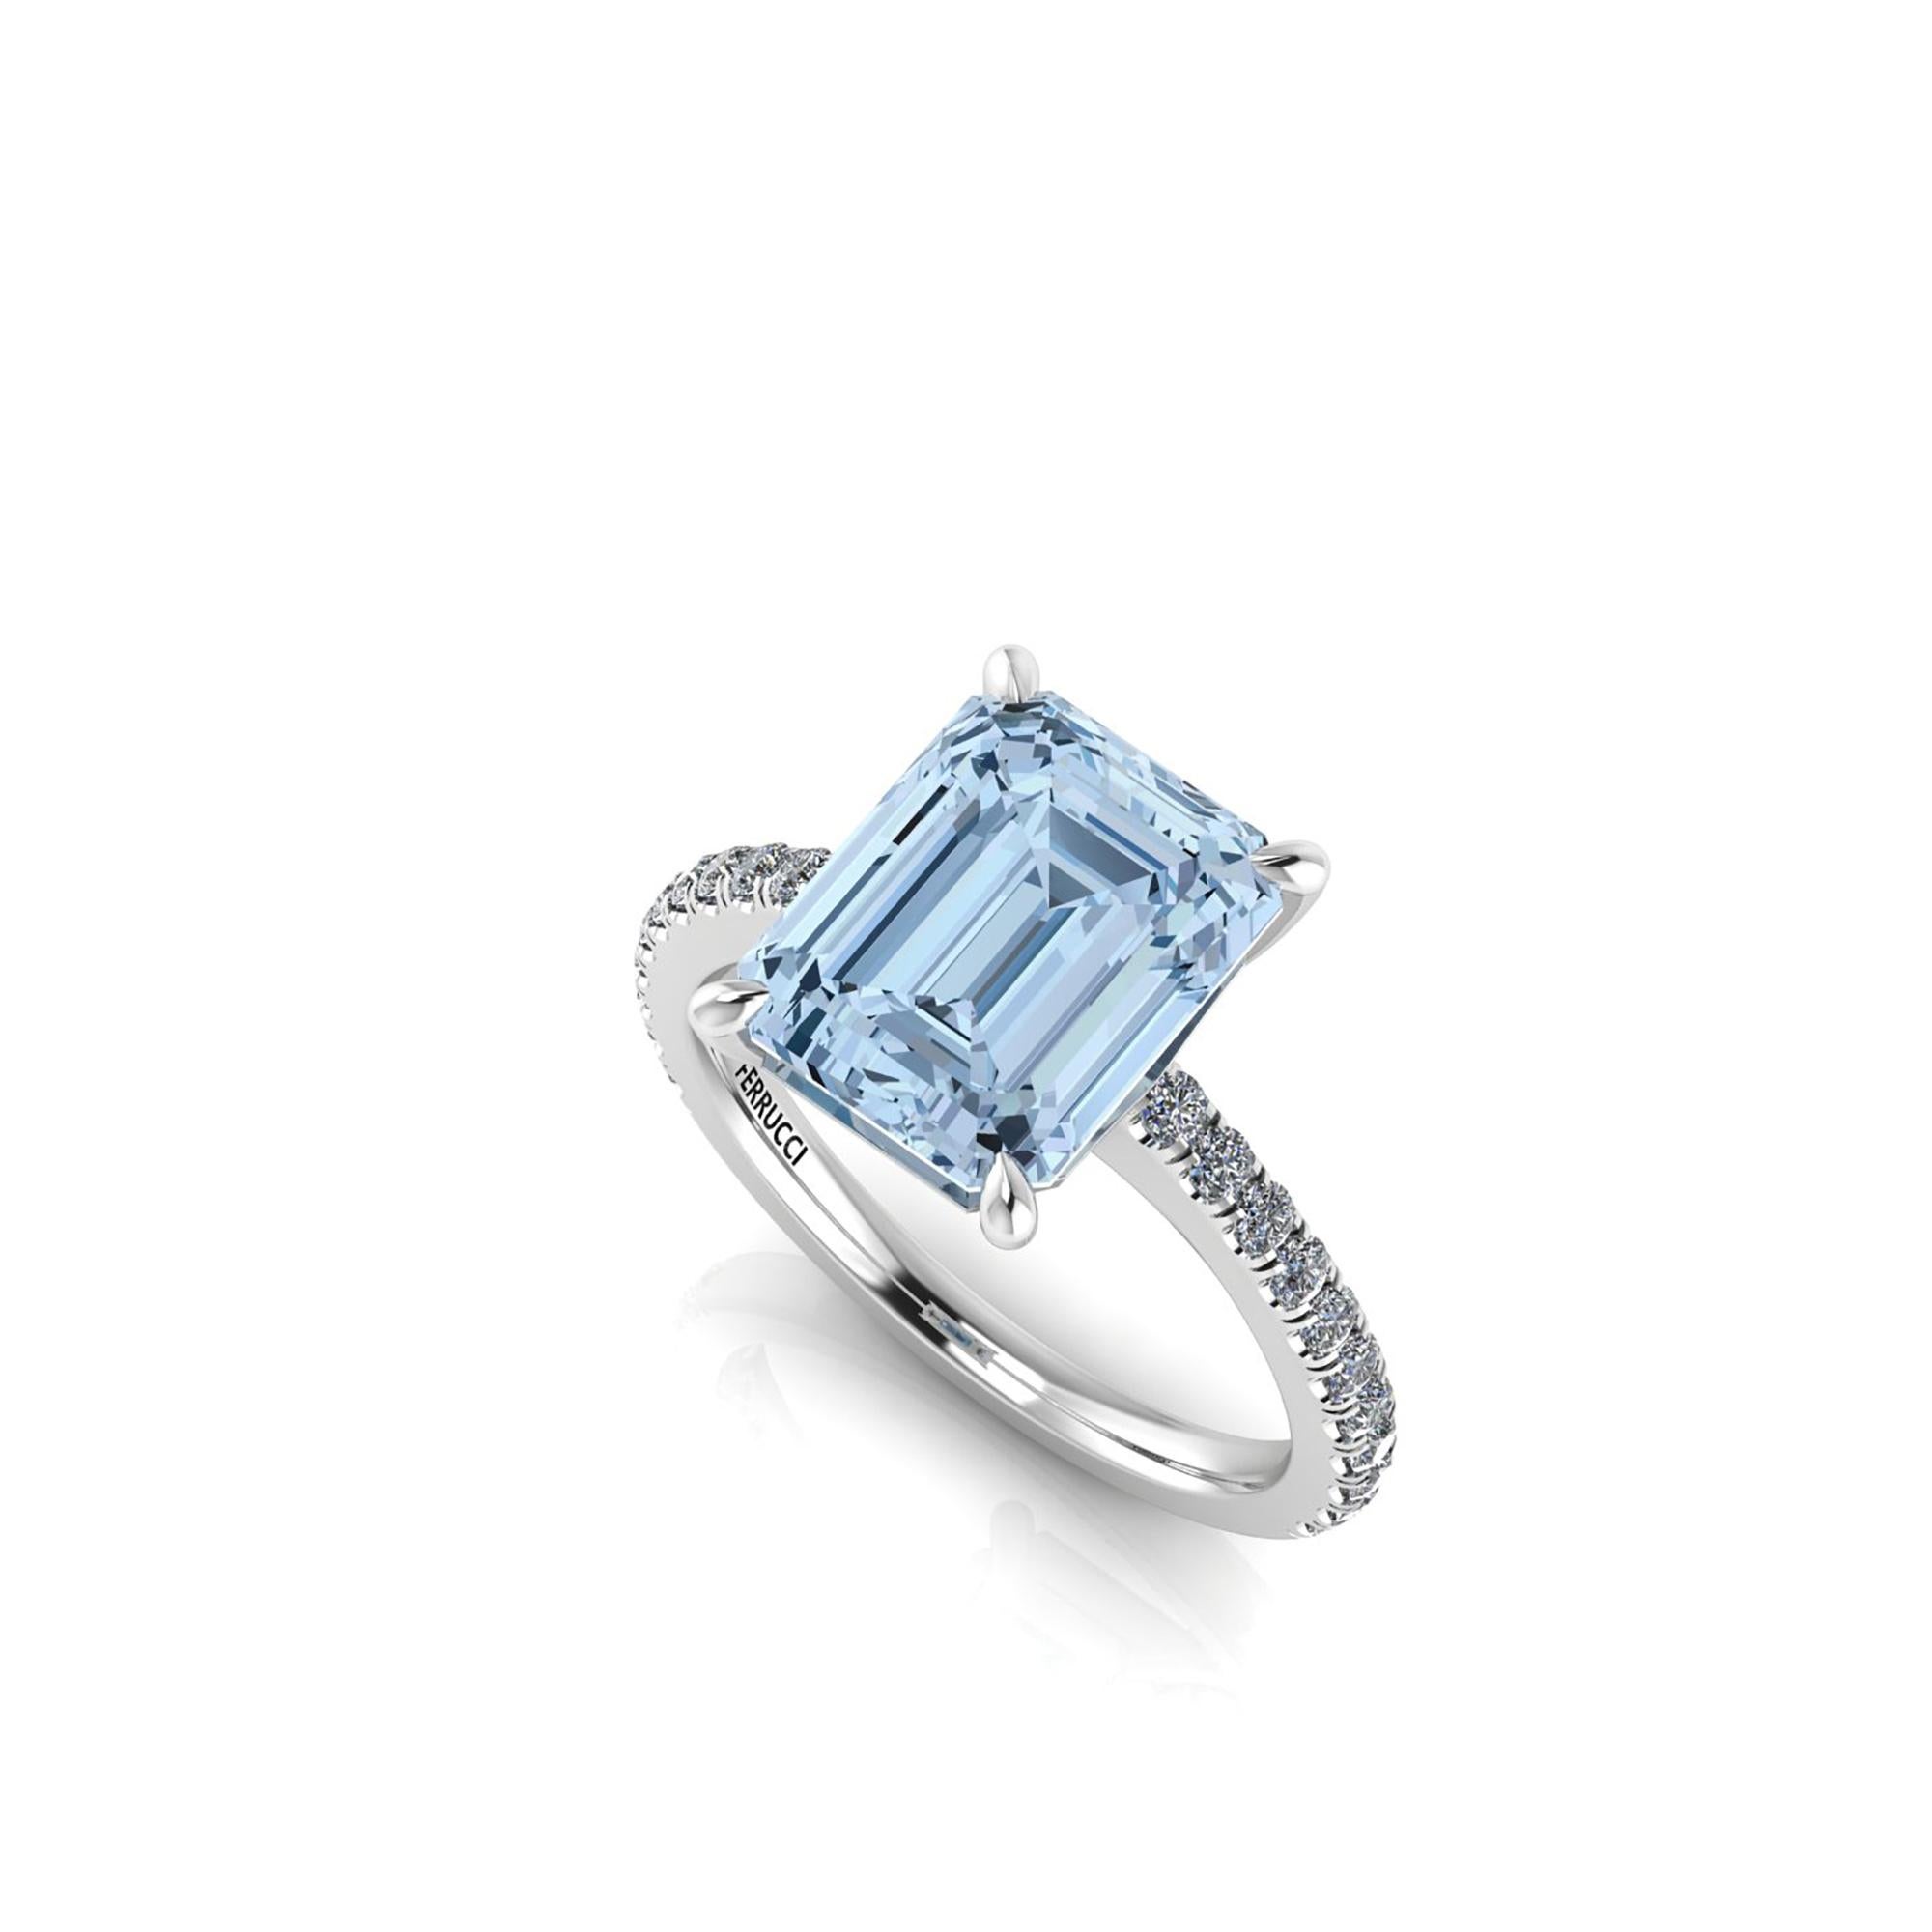 An exquisite 4.61 carat Aquamarine, emerald cut, very high quality color, eye clean gem, accompanied a pave' of bright diamonds of approximately  total carat weight of 0.38 carat, set in an hand crafted, delicate and sophisticated looking Platinum